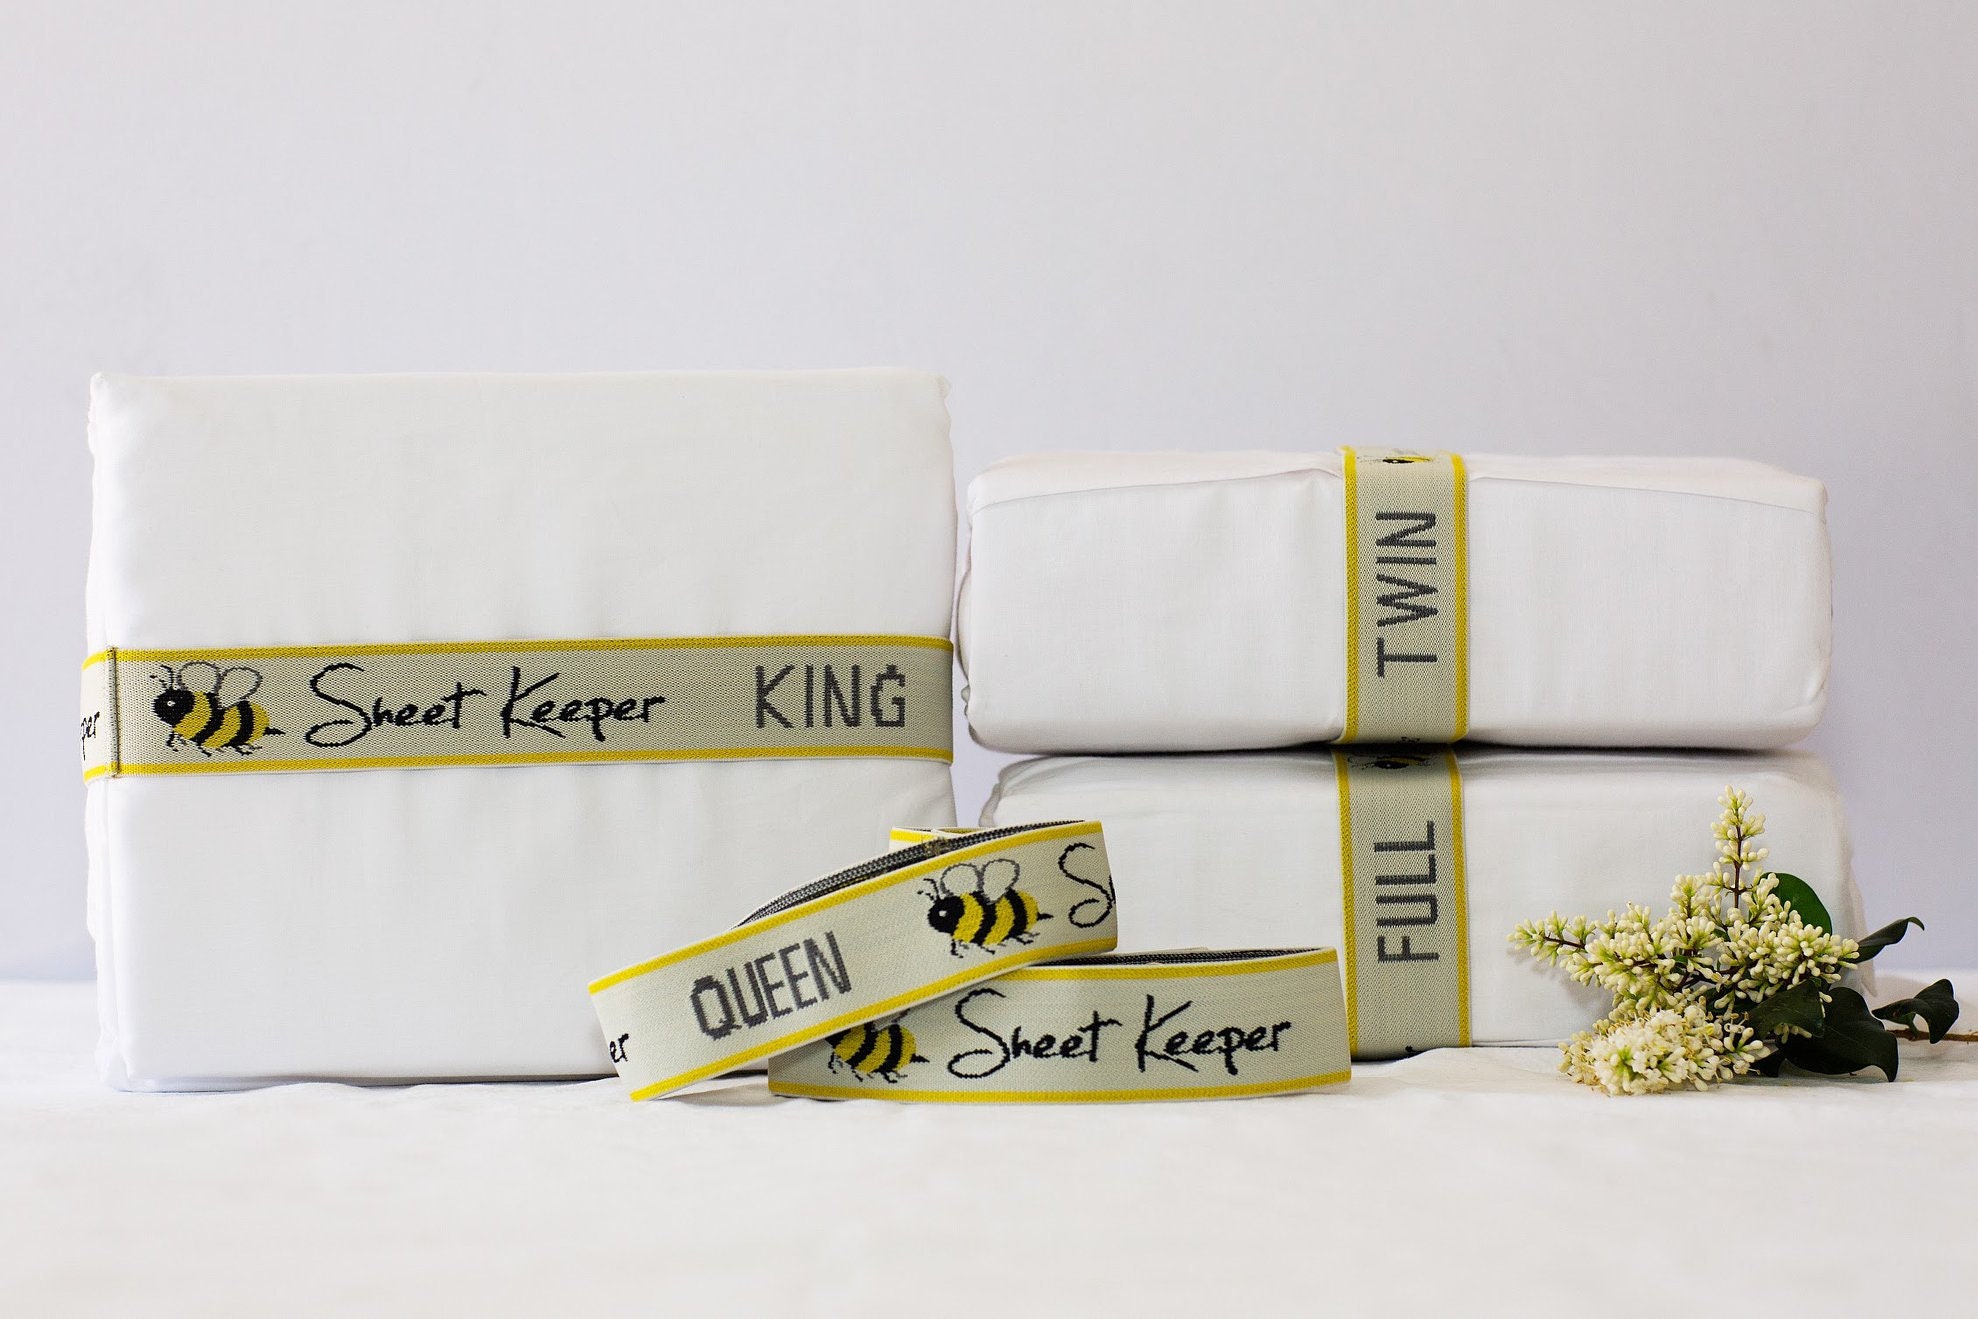 Bed Sheet Organizer and Storage Size Label Bands | Sheets Set Organizers for Linen Closet - Labeled Elastic Bedding Sheet Keepers Straps for